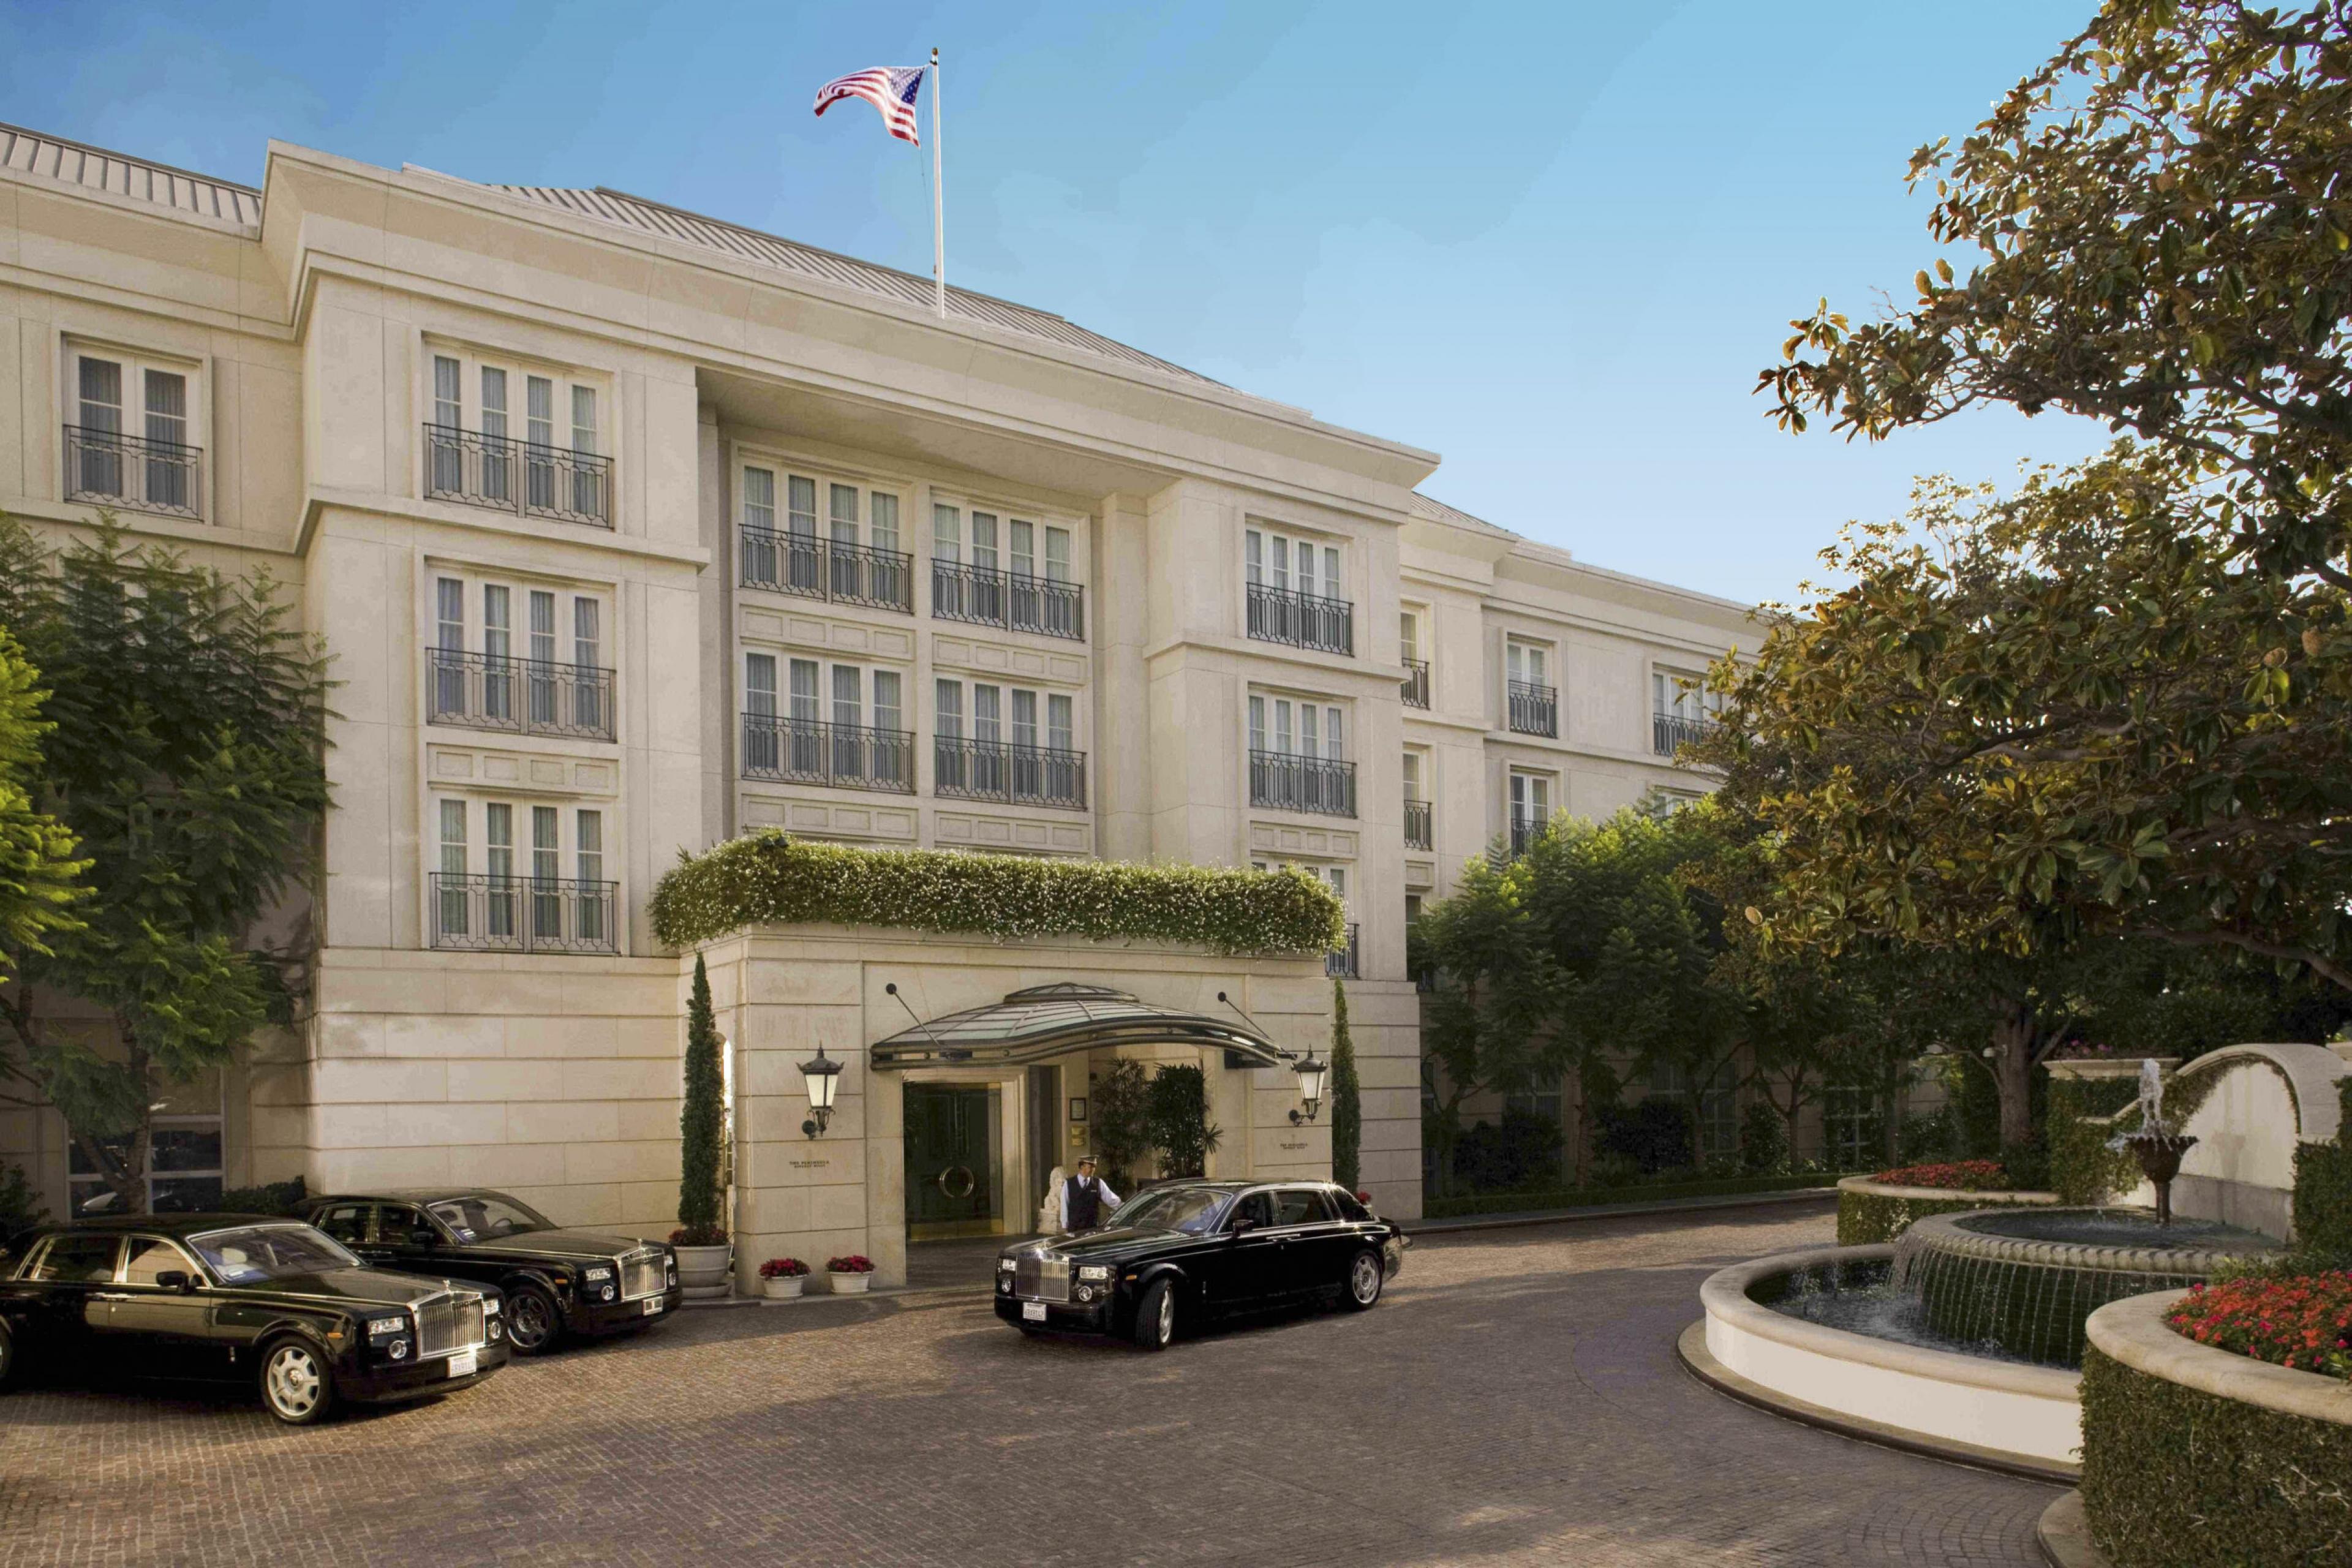 Front driveway and entrance of the hotel. The building is large and white and a worker opens a car door of a Rolls Royce